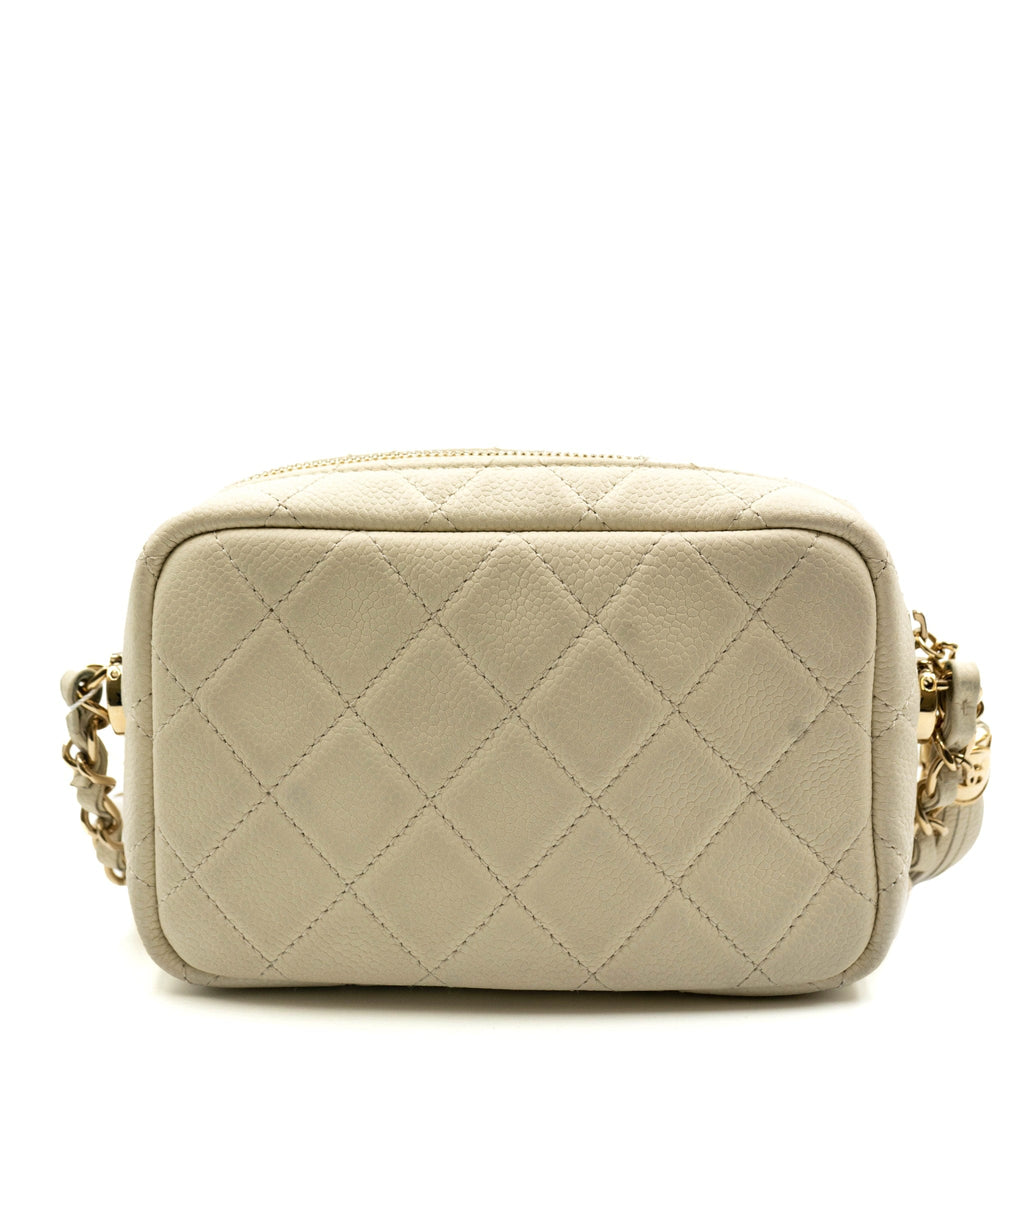 This stunning Chanel bag is the epitome of luxury and style – Only